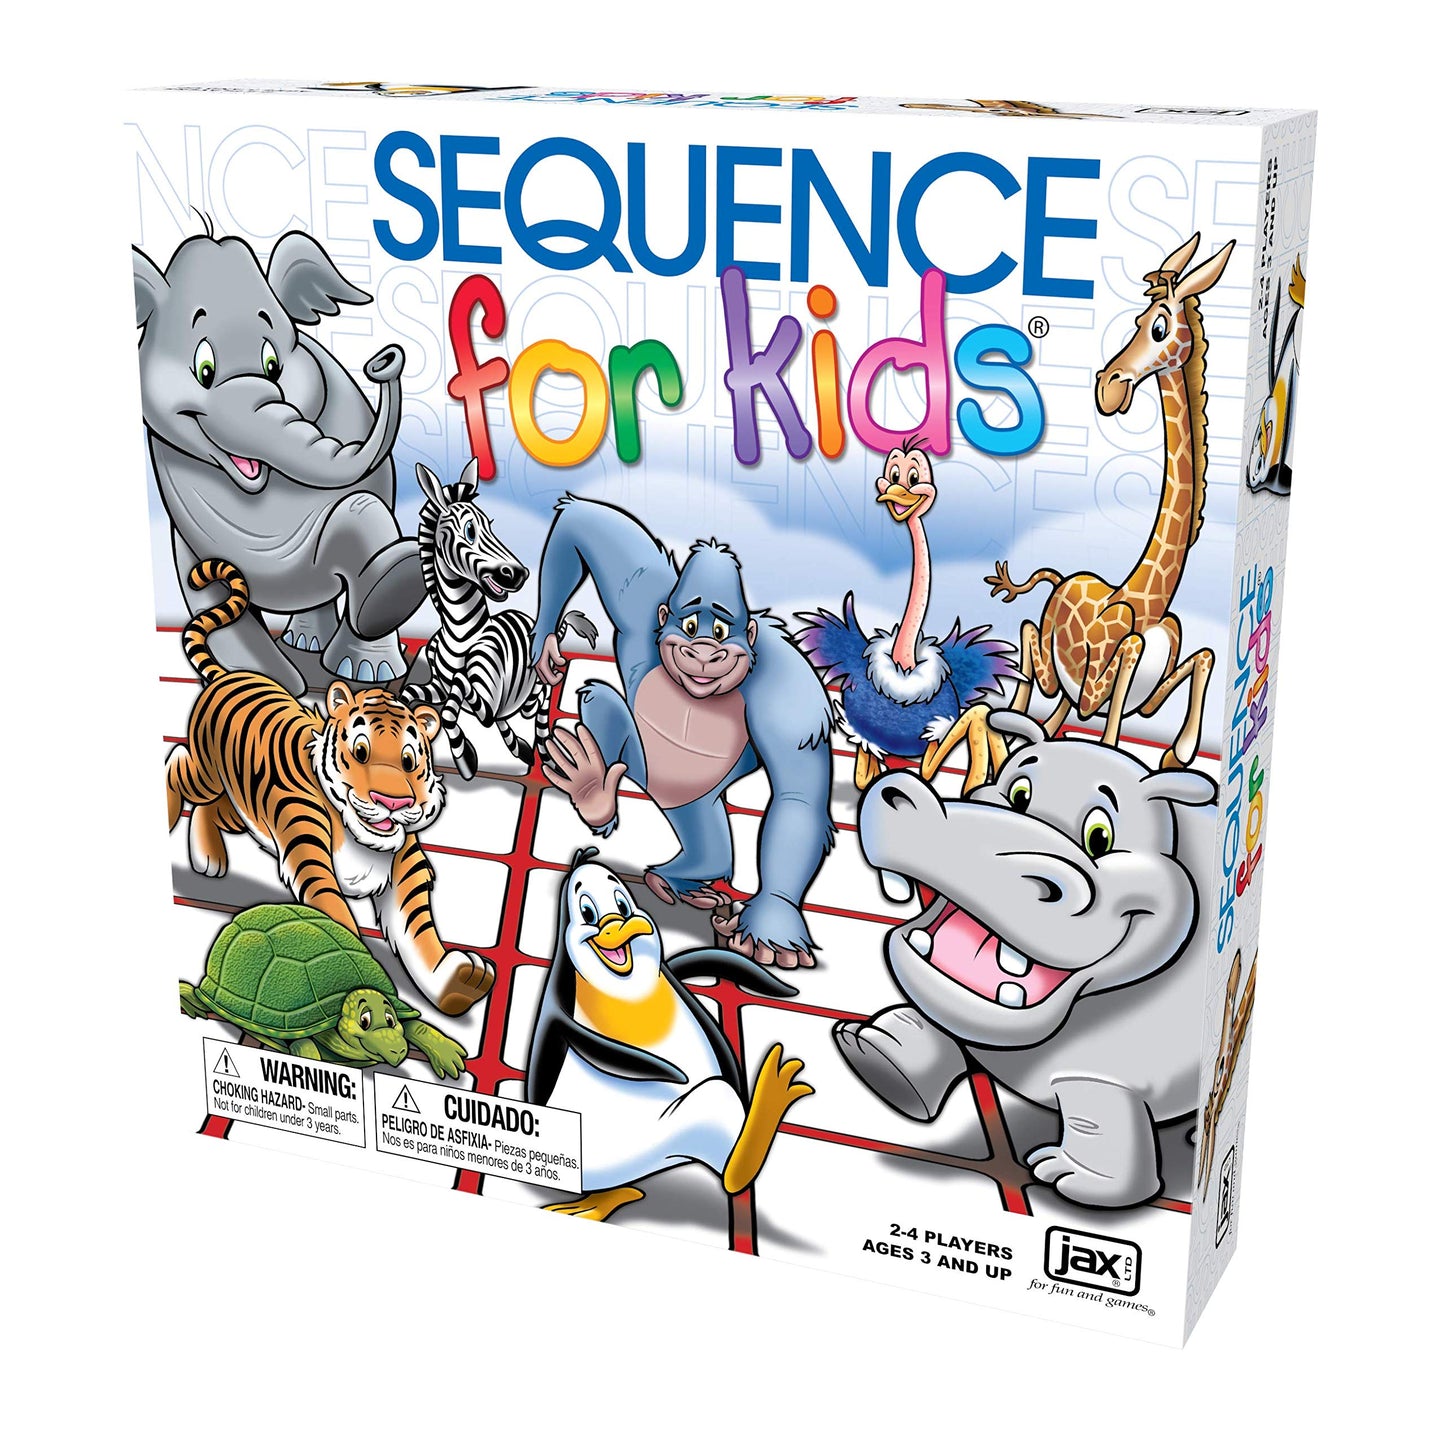 SEQUENCE for Kids -- The 'No Reading Required' Strategy Game by Jax and Goliath, Multi Color, 11 inches (2-4 players) (Packaging May Vary)